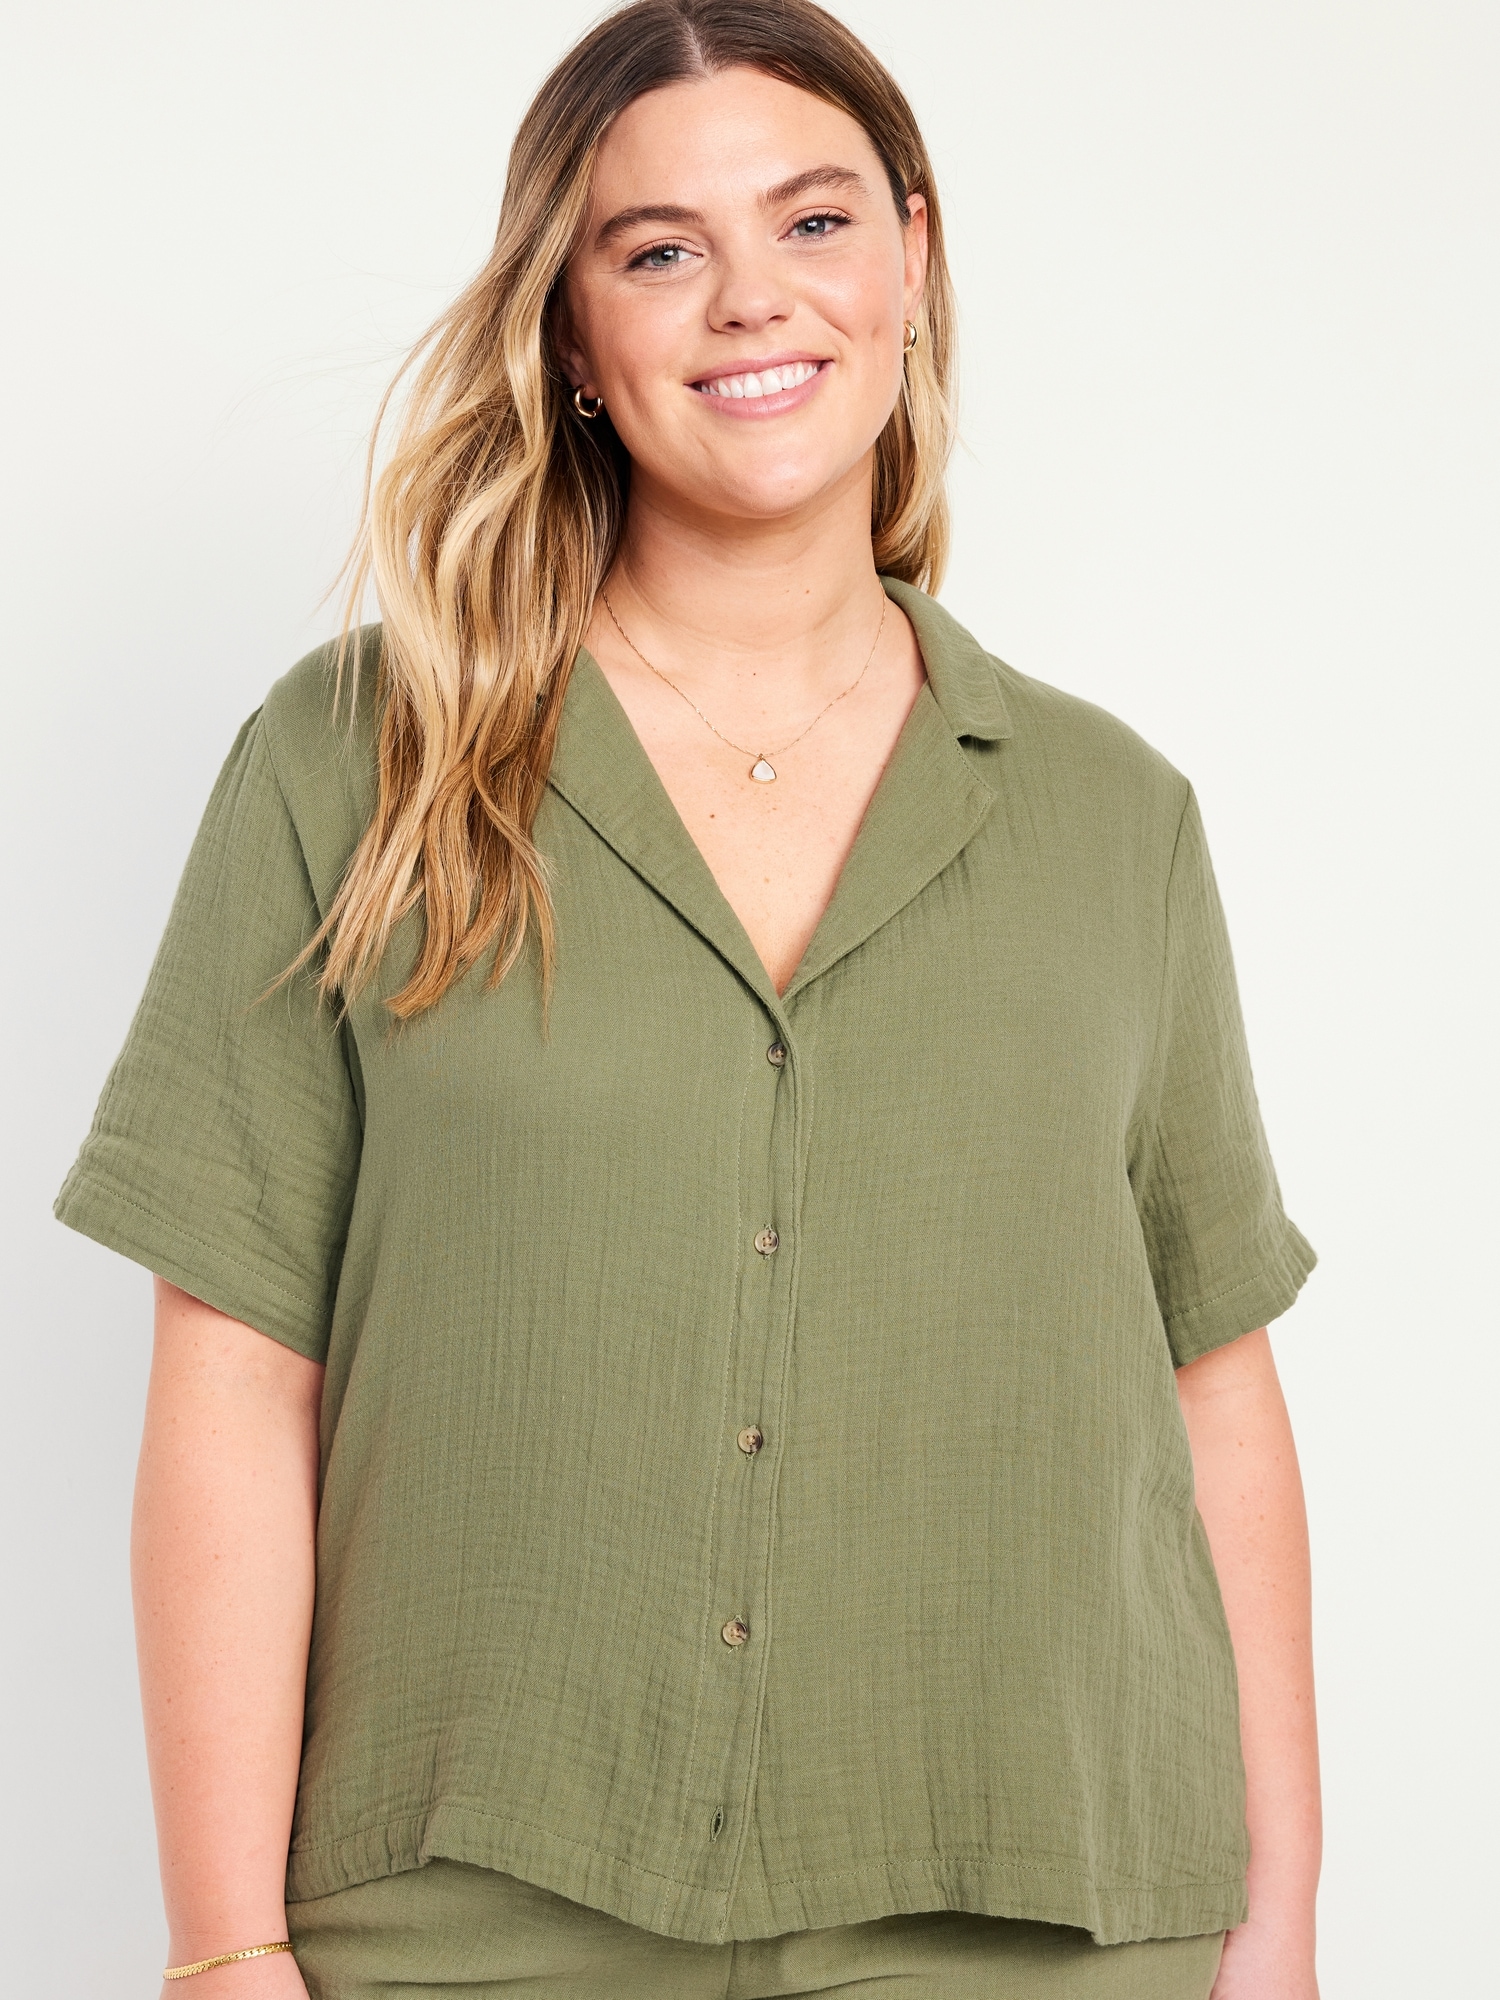 An On-Trend Top: Wild Fable Short Sleeve Woven Button-Down Shirt